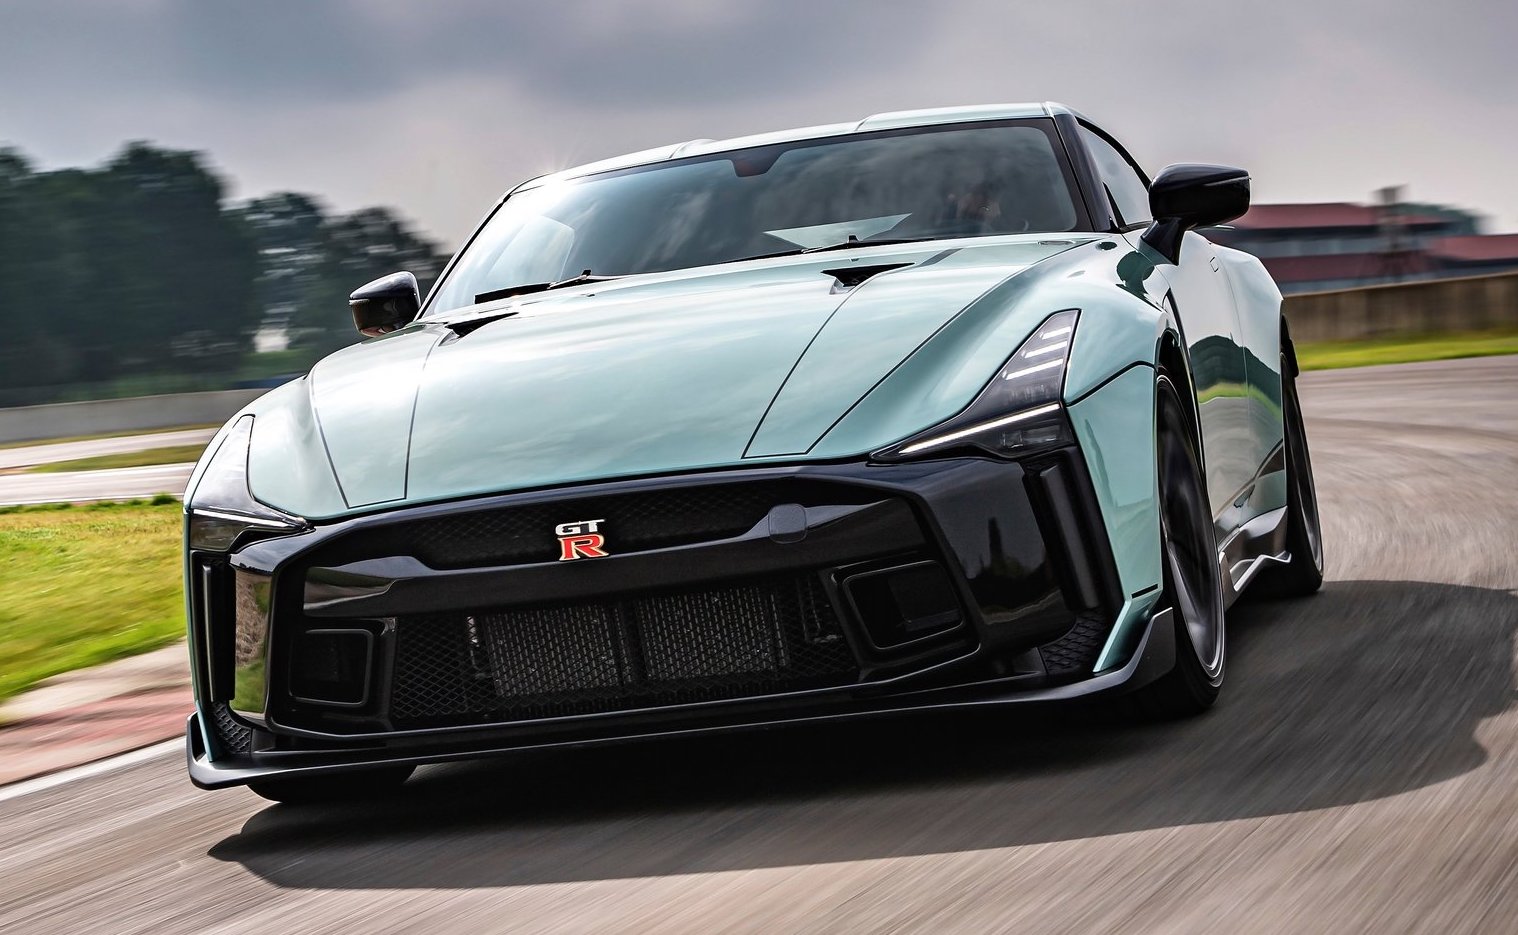 Nissan R36 GTR set for 2023, KERS hybrid likely report